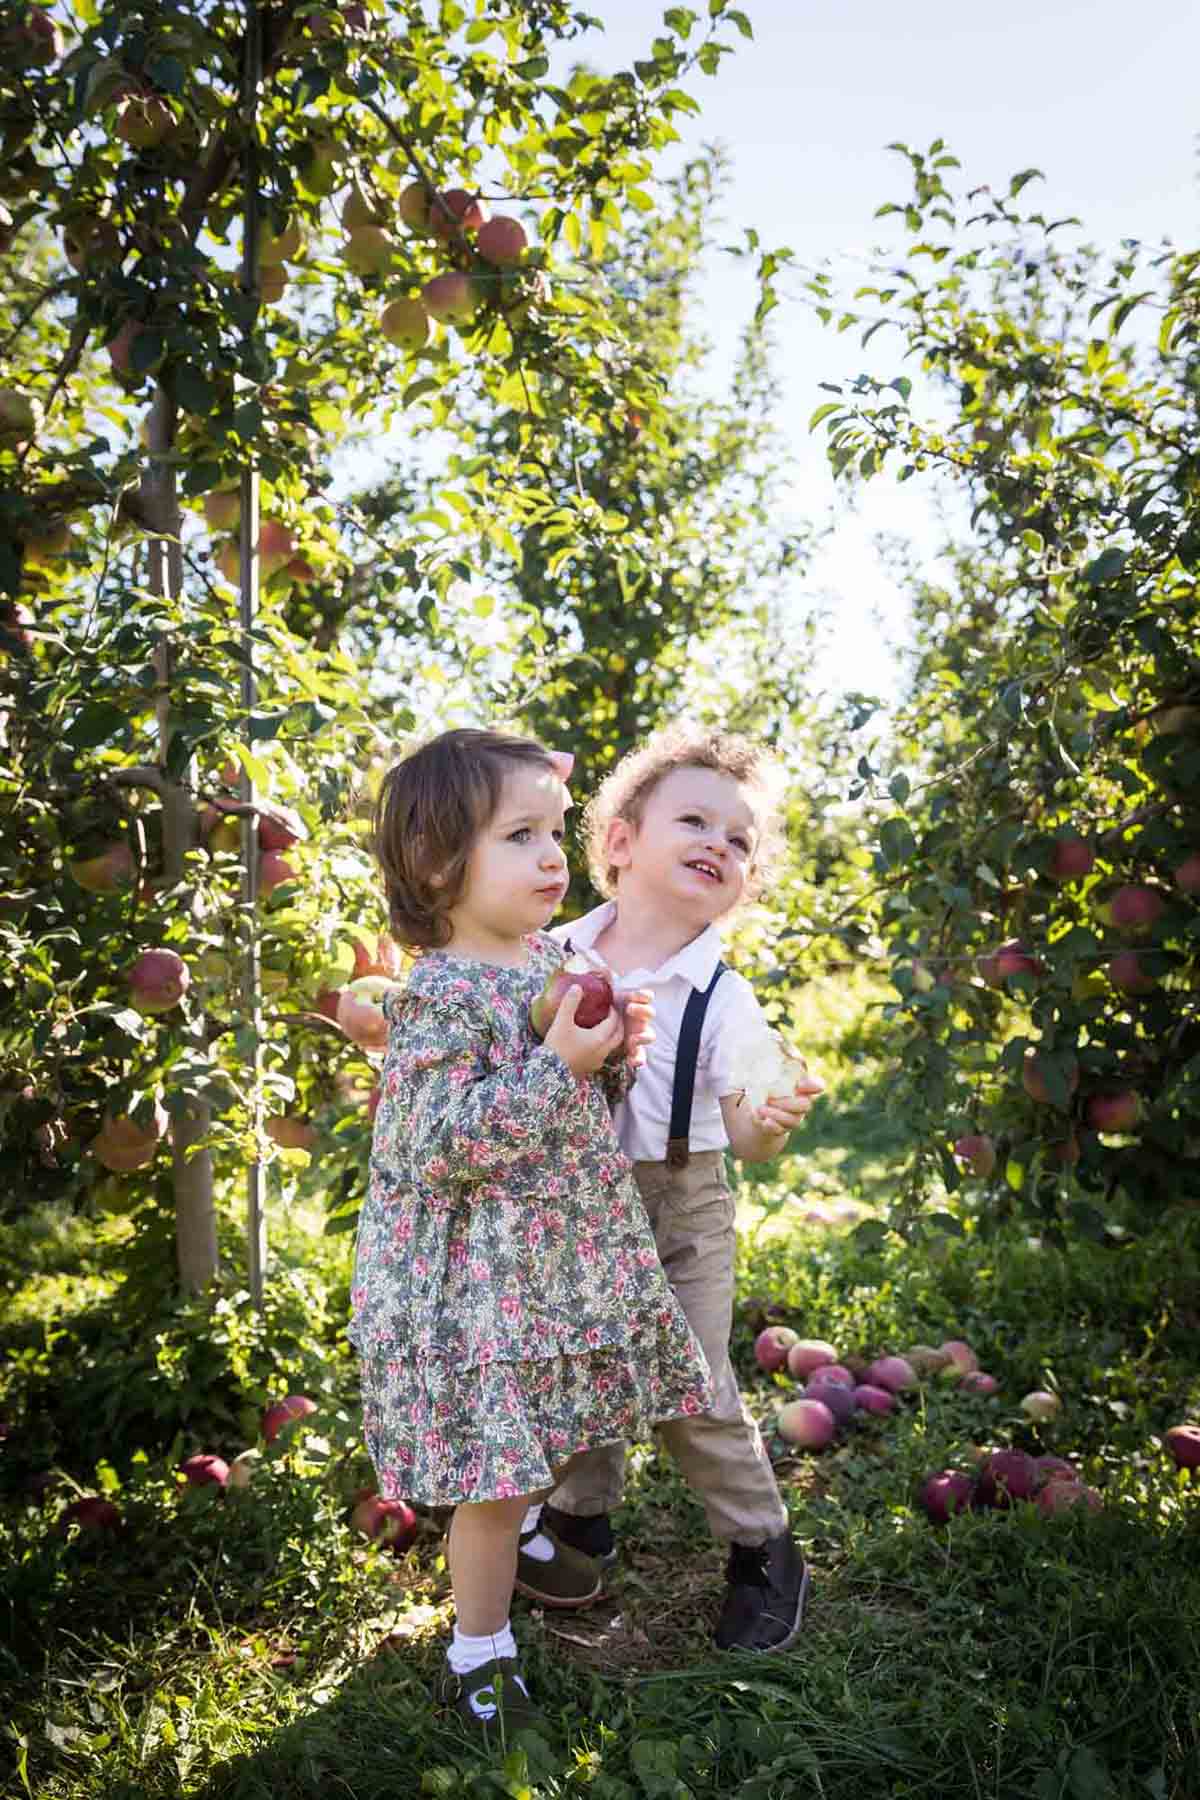 Two children in an orchard for an article on tips for apple picking family photos